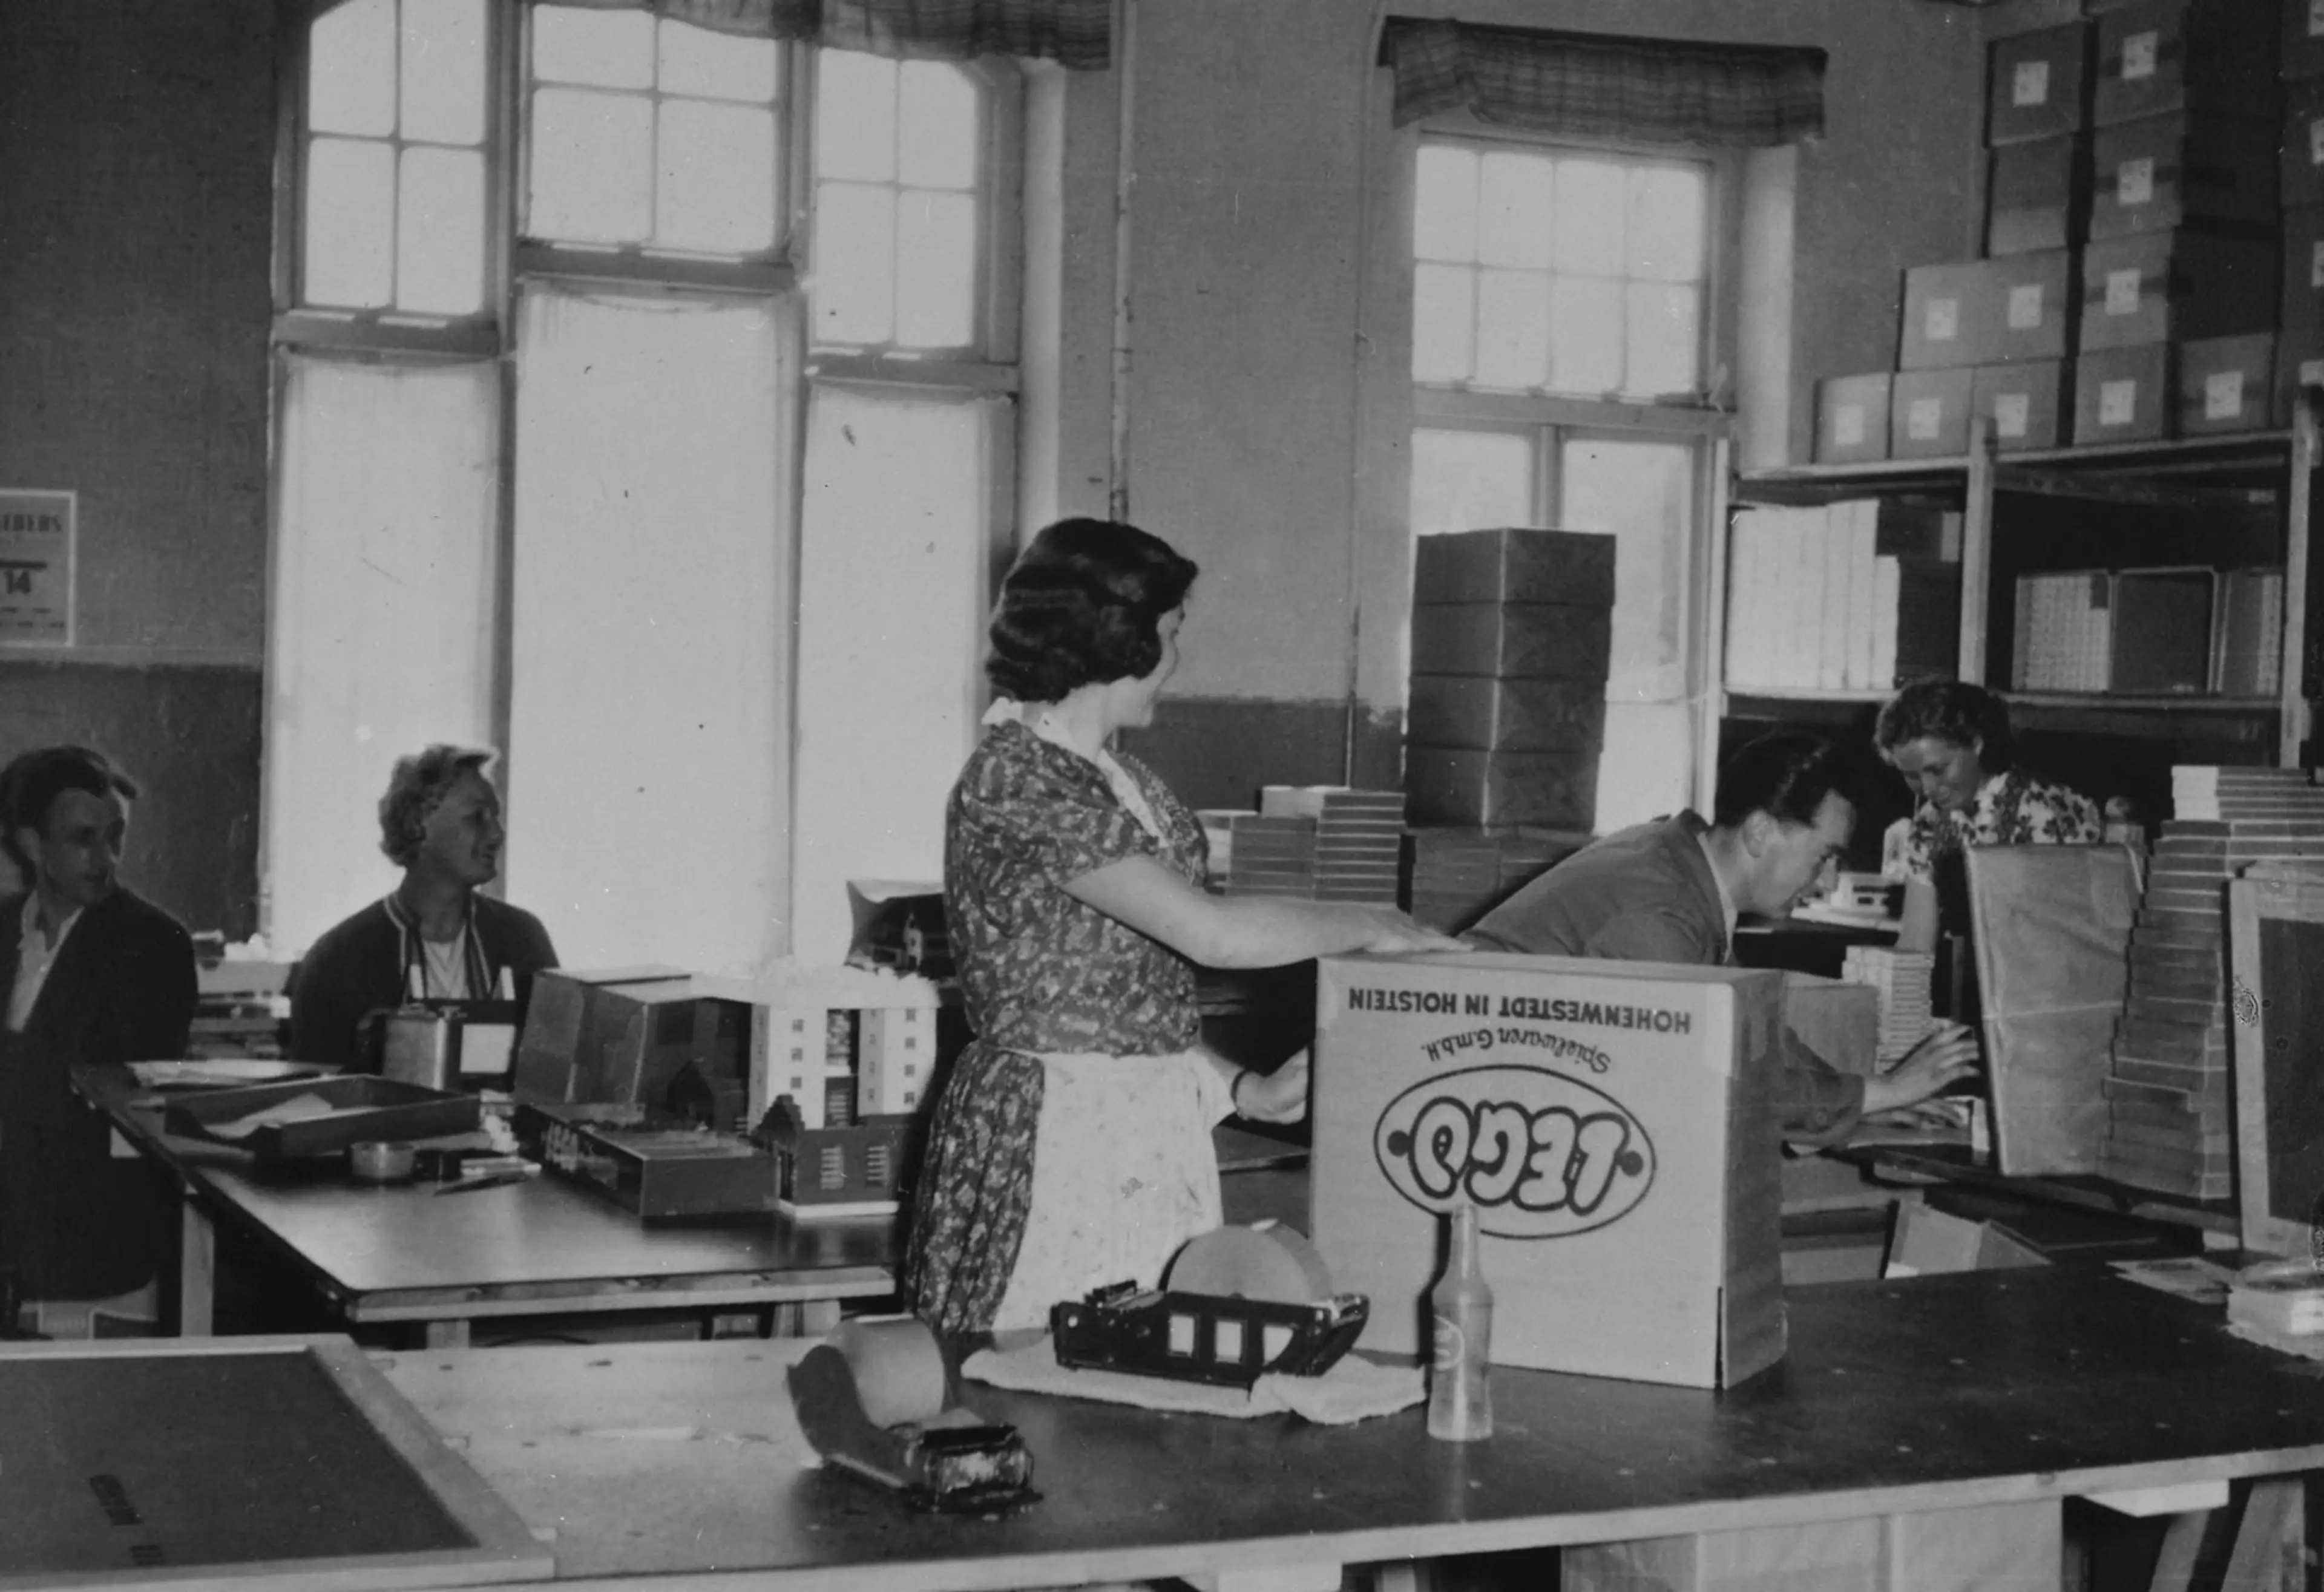 LEGO employees packing products, 1958